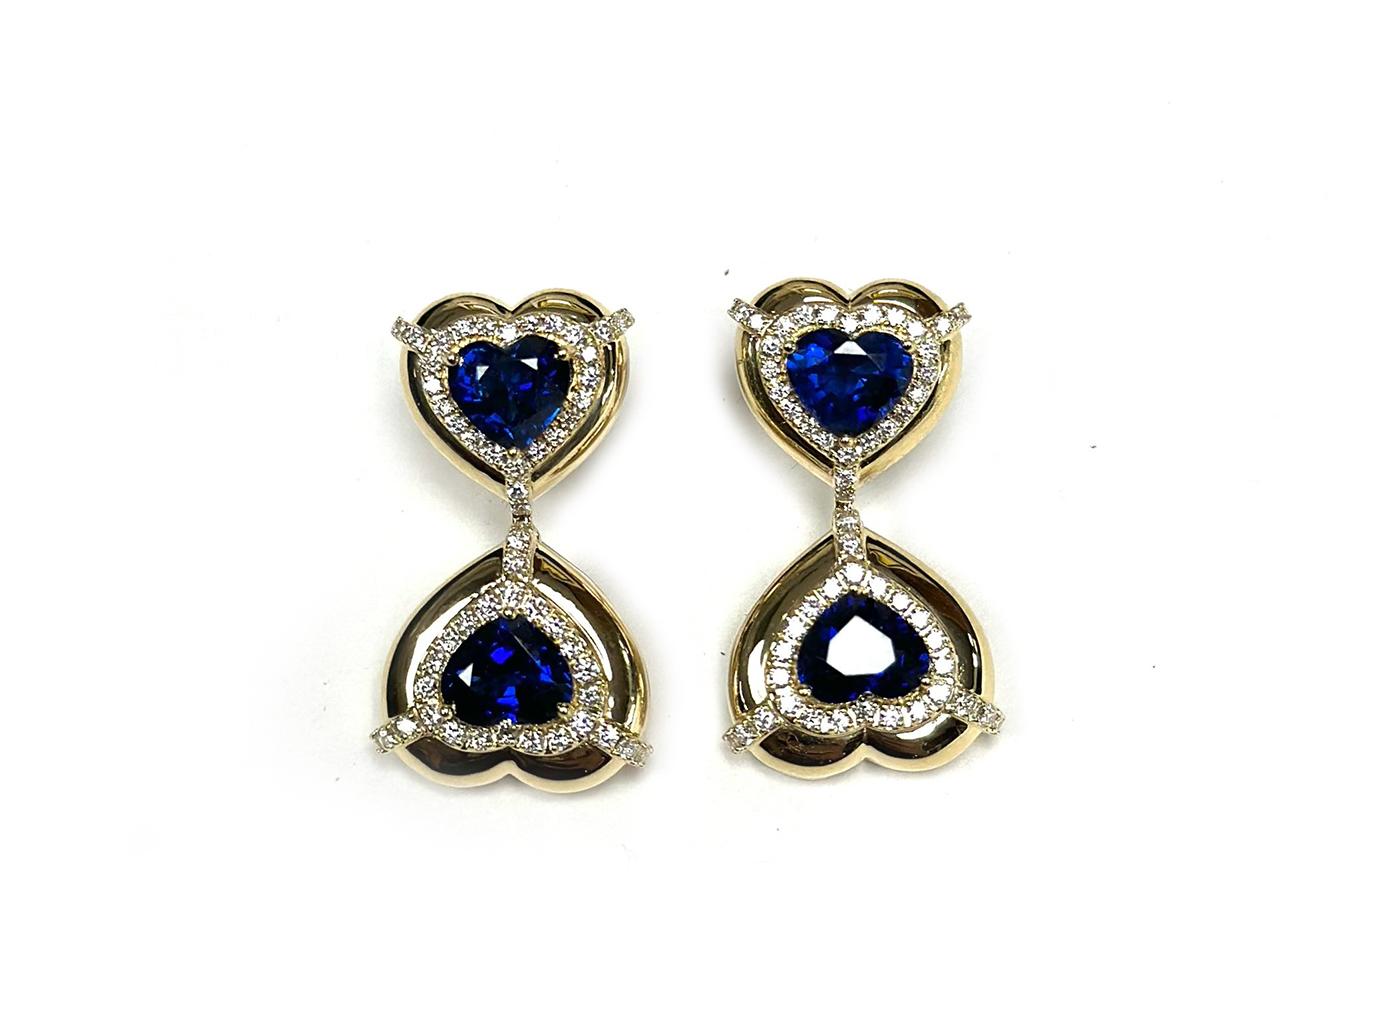 These Double Heart Shape Blue Sapphire Earrings with Diamonds in 18K Yellow Gold, part of the 'G-One' Collection, are a stunning display of elegance. These earrings showcase two heart-shaped blue sapphires adorned with diamonds, set in 18K yellow